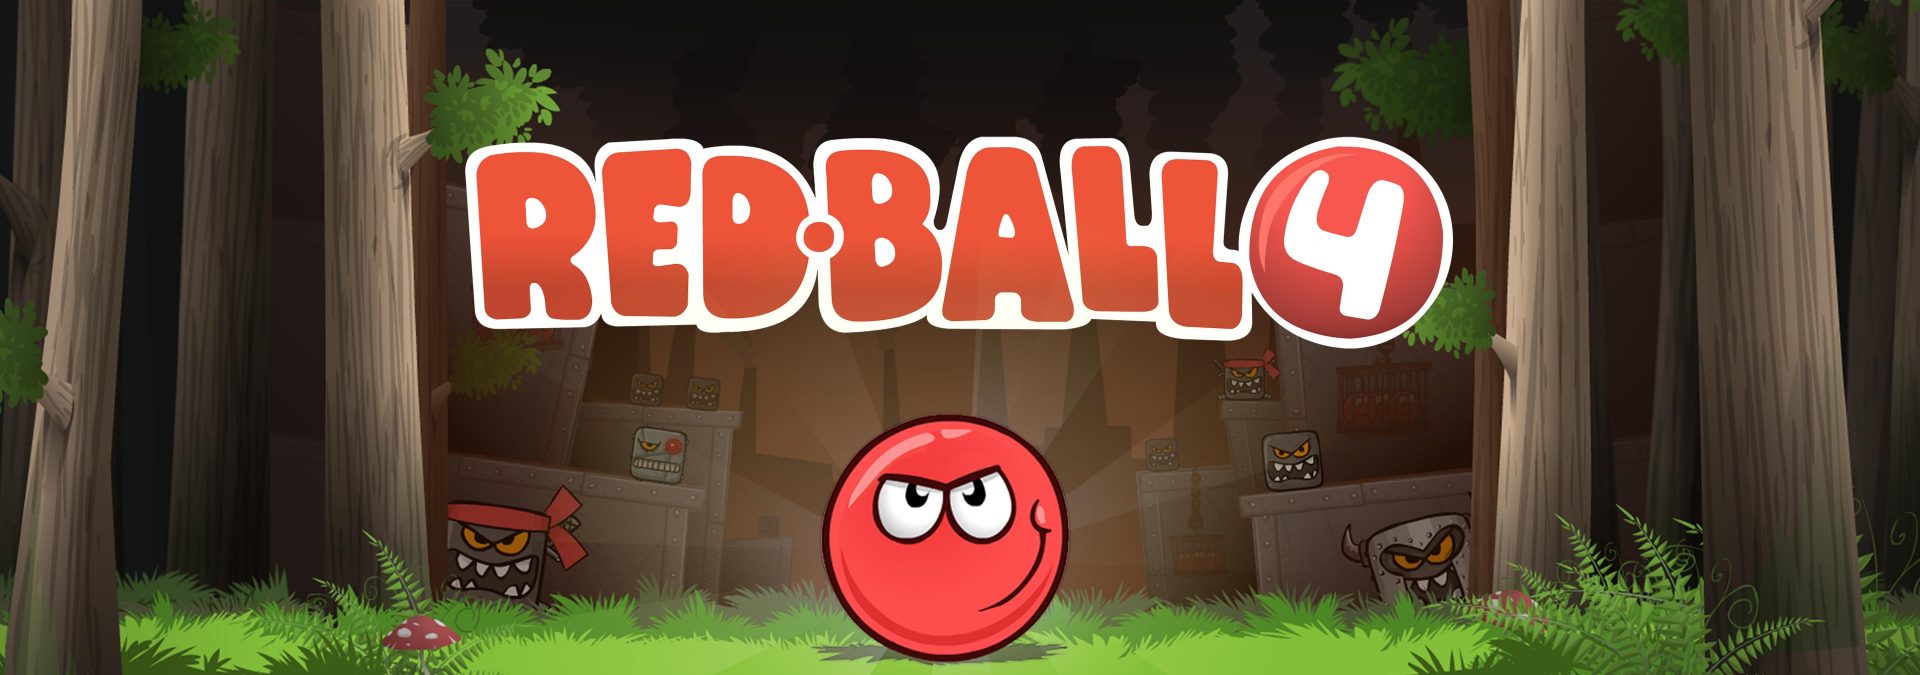 red ball 4 game